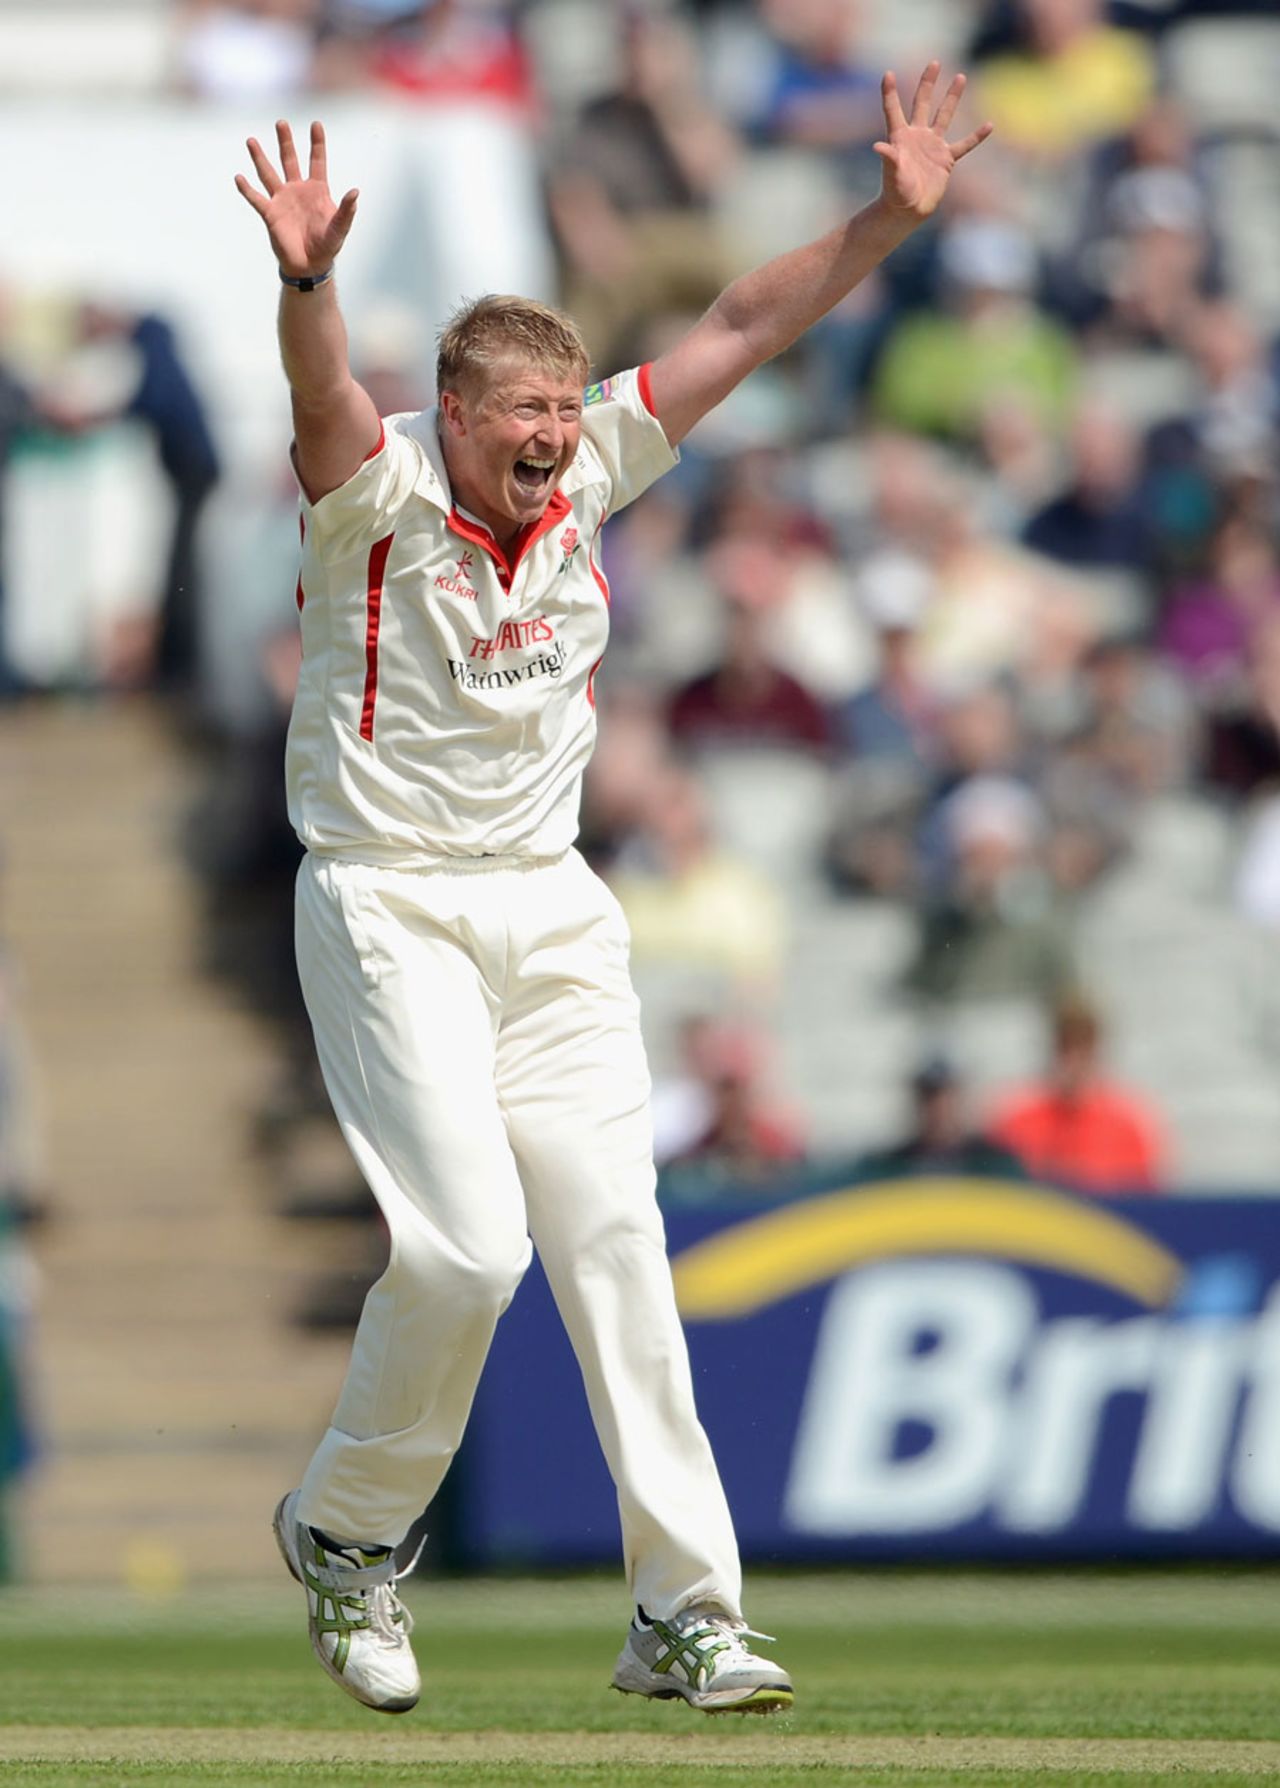 Glen Chapple appeals for the wicket of Alex Hales, Lancashire v Nottinghamshire, County Championship, Division One, Old Trafford, 1st day, May 2, 2012